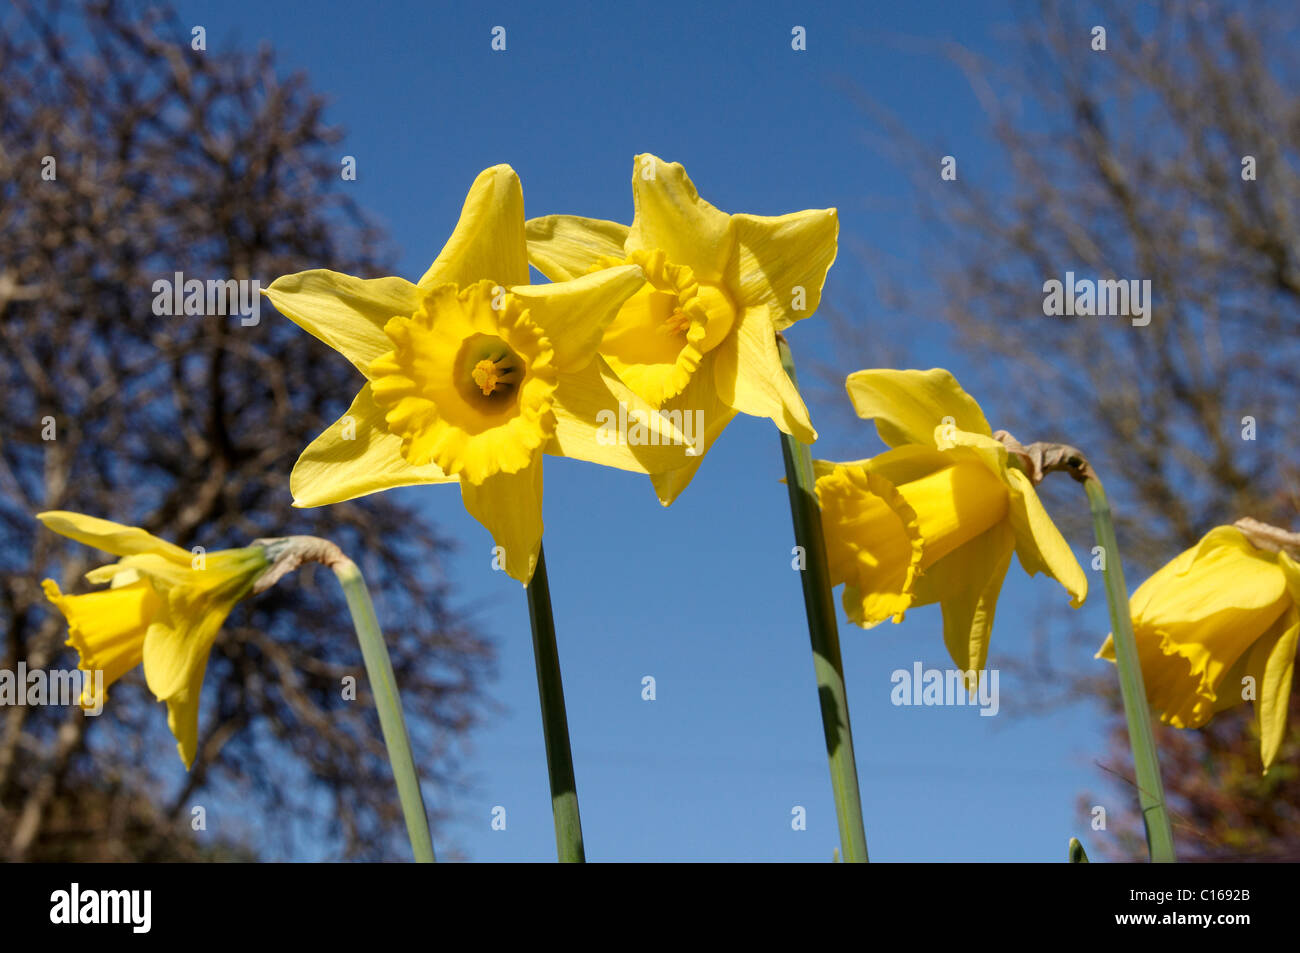 King Alfred type trumpet daffodils in an English garden Stock Photo